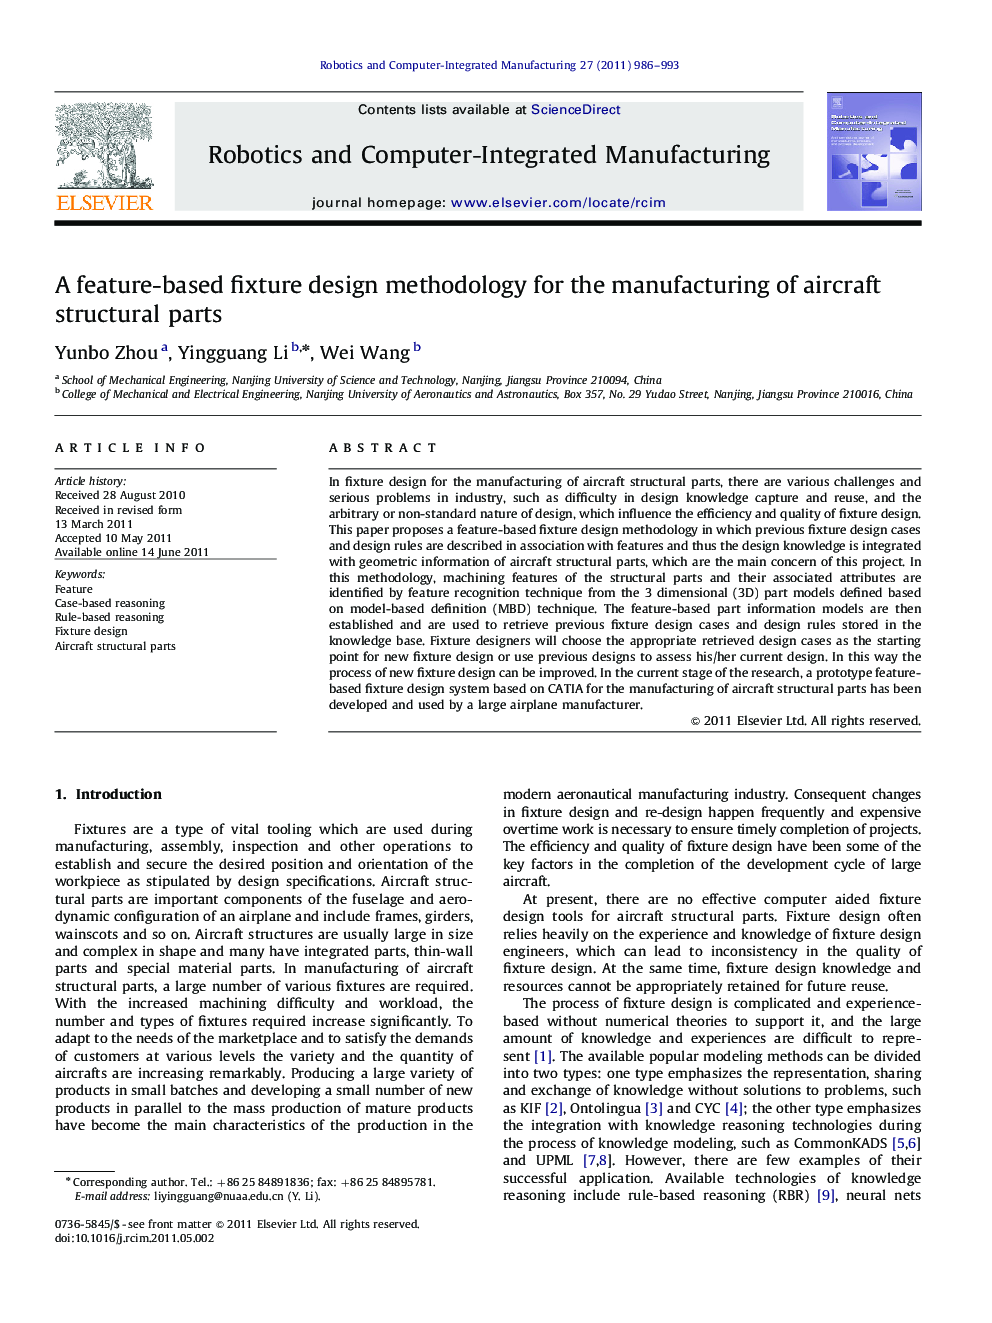 A feature-based fixture design methodology for the manufacturing of aircraft structural parts